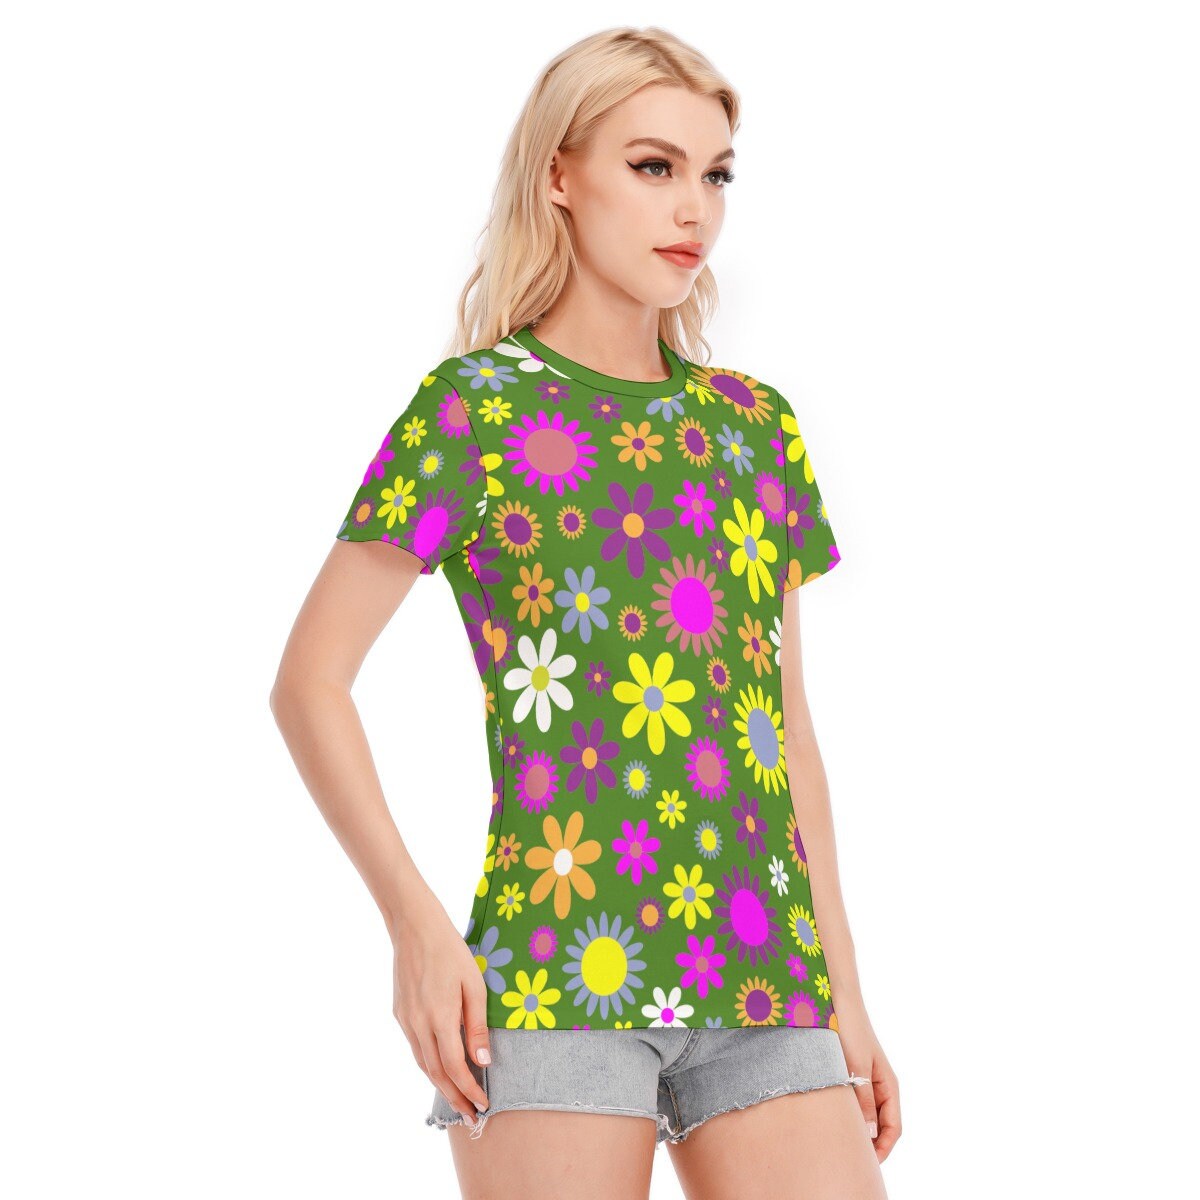 Mod top, 60s style top, Retro Top, Womens Tops, Womens Tshirts, Mod T-shirt, Floral Tshirt, Mod 60s Tshirt, Green T-shirt, Vintage style